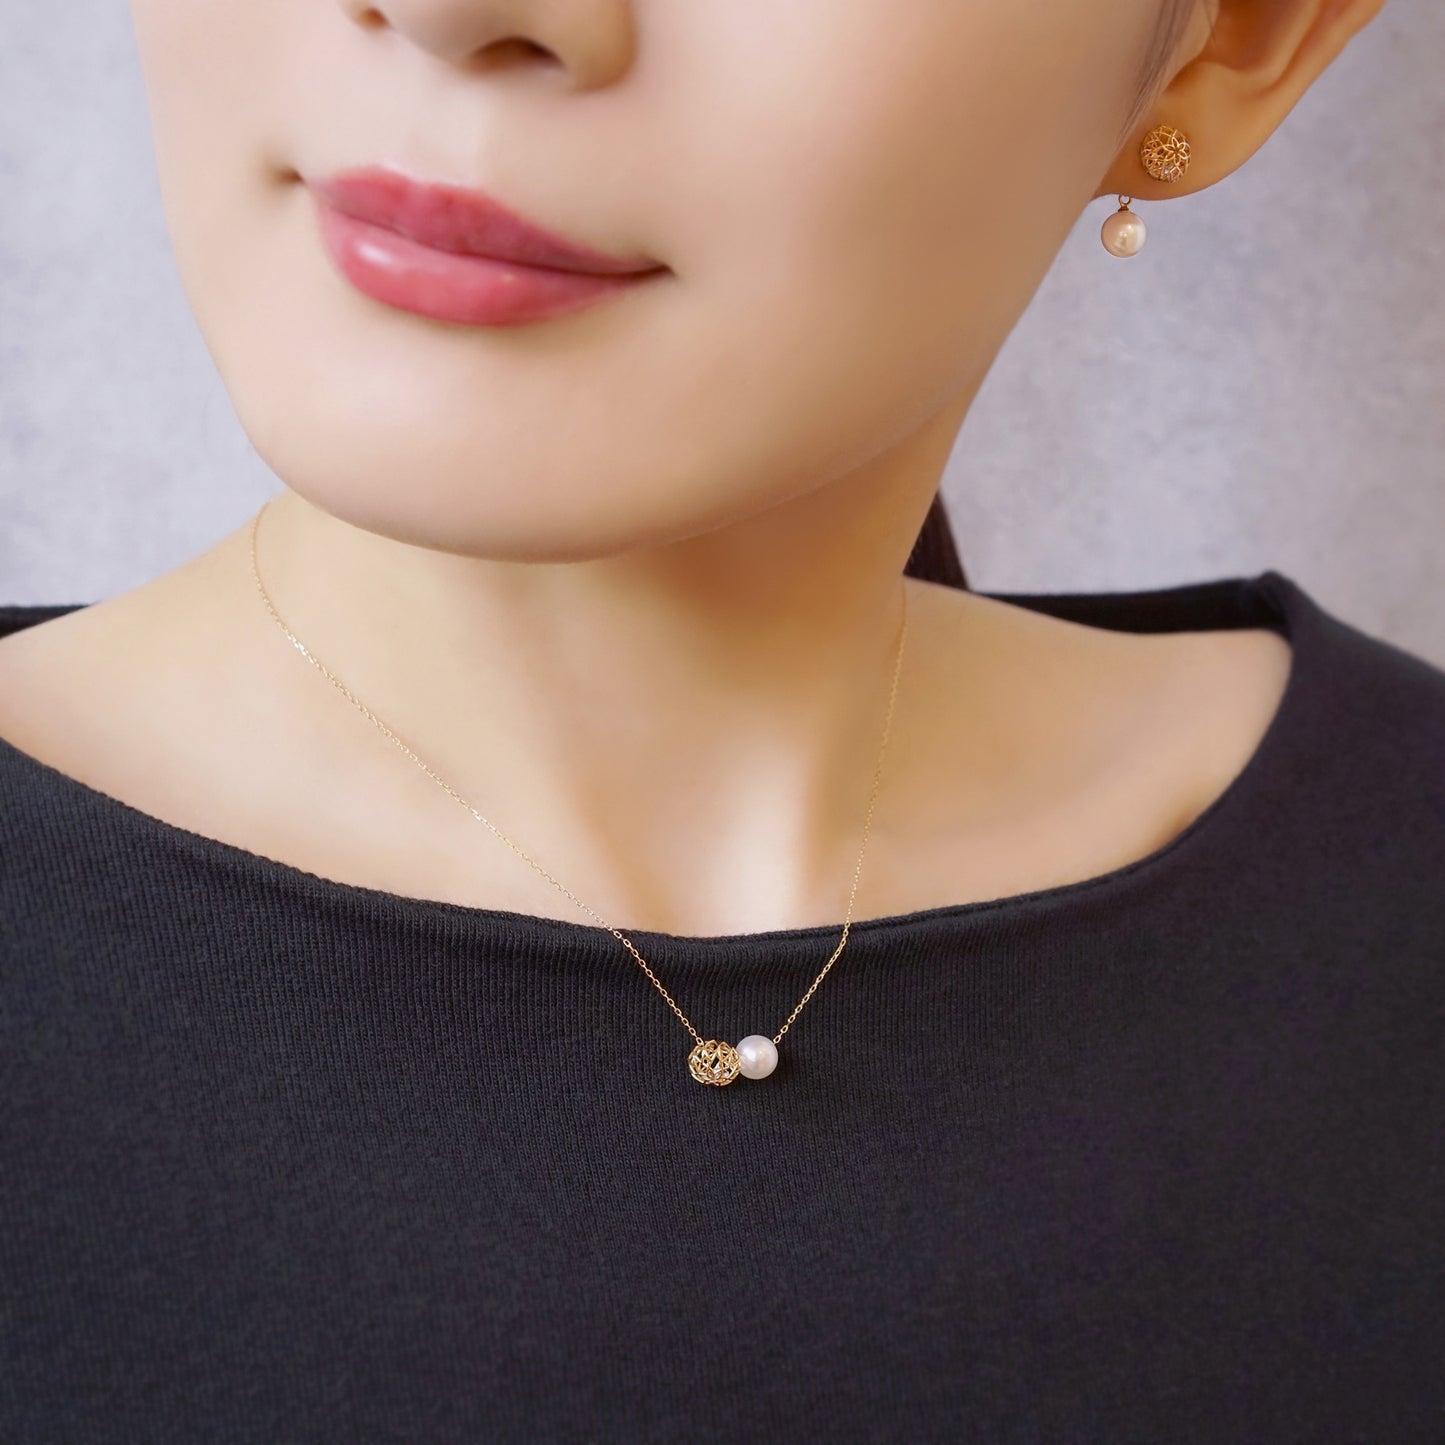 [Pannier] 10K Yellow Gold Pearl Flower Shaped Necklace - Model Image